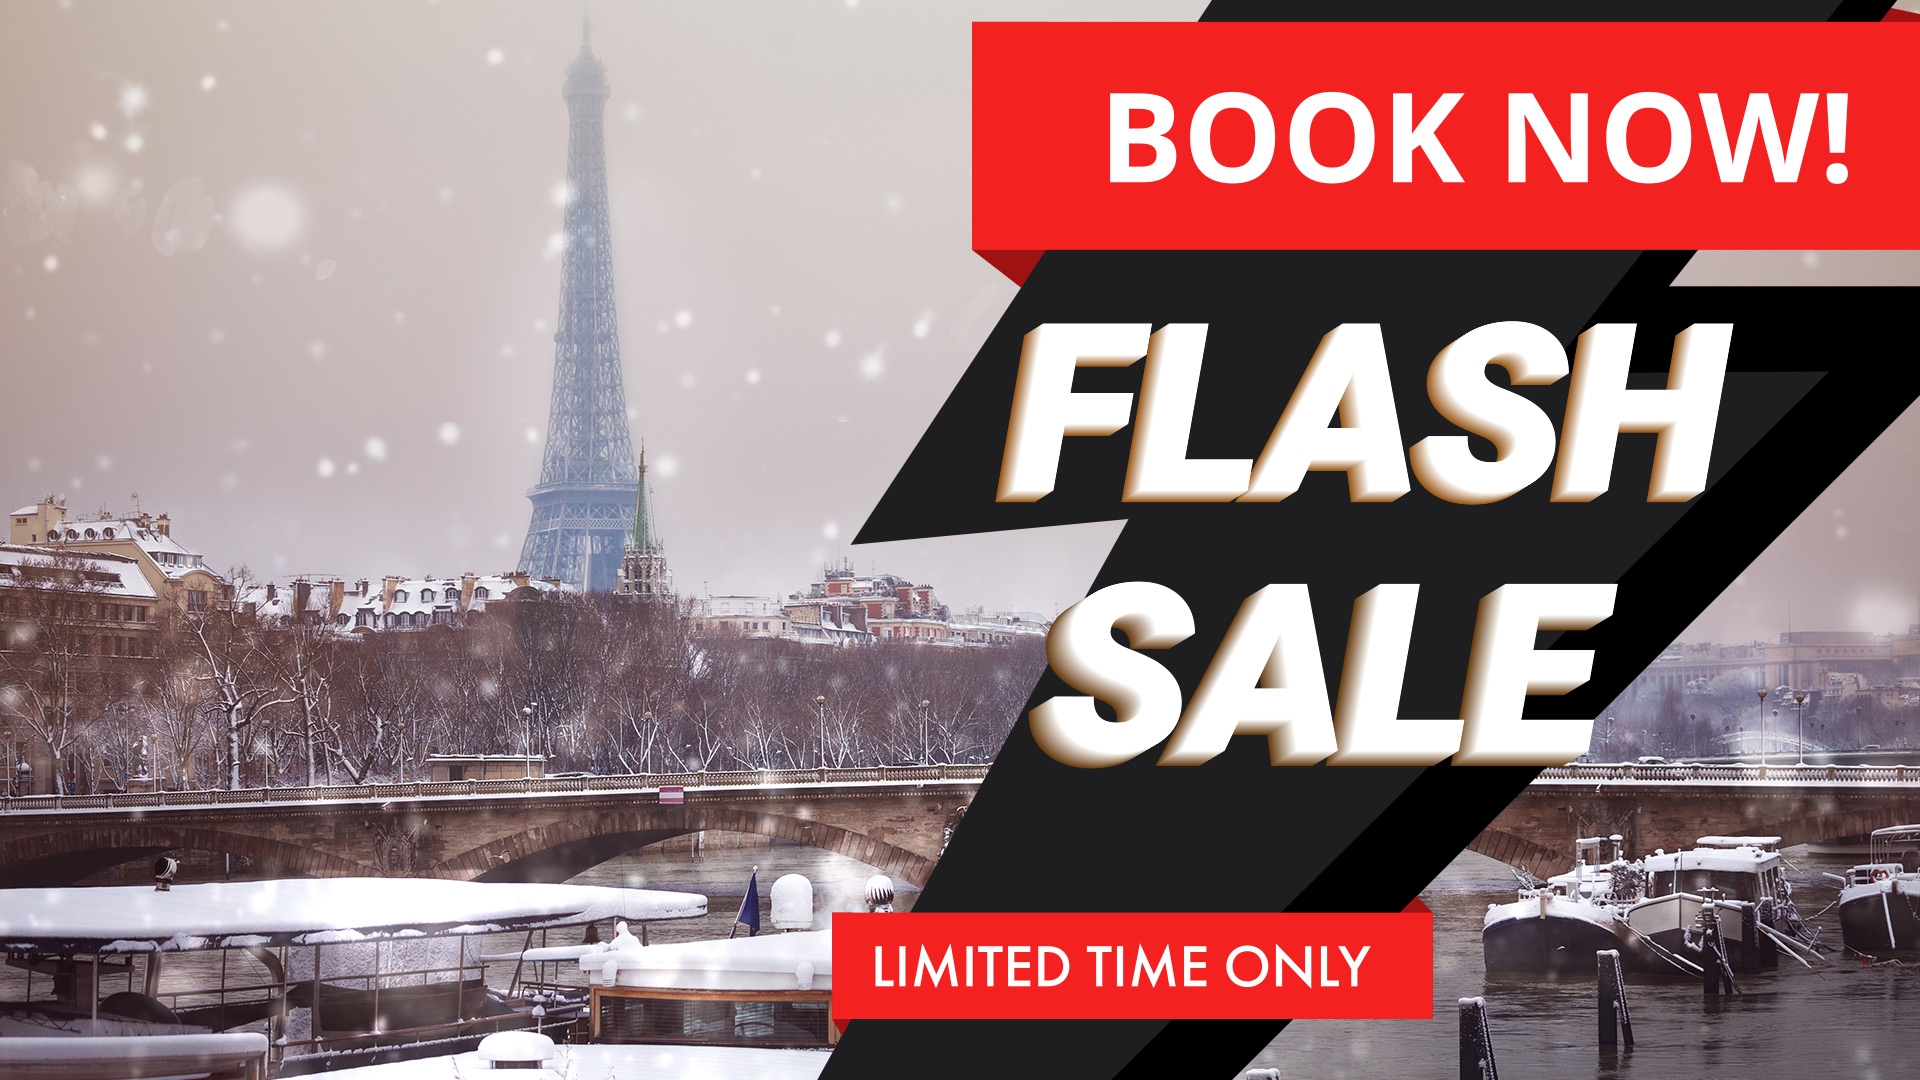 Save Up To 25% With Our Last-Minute Flash Sale